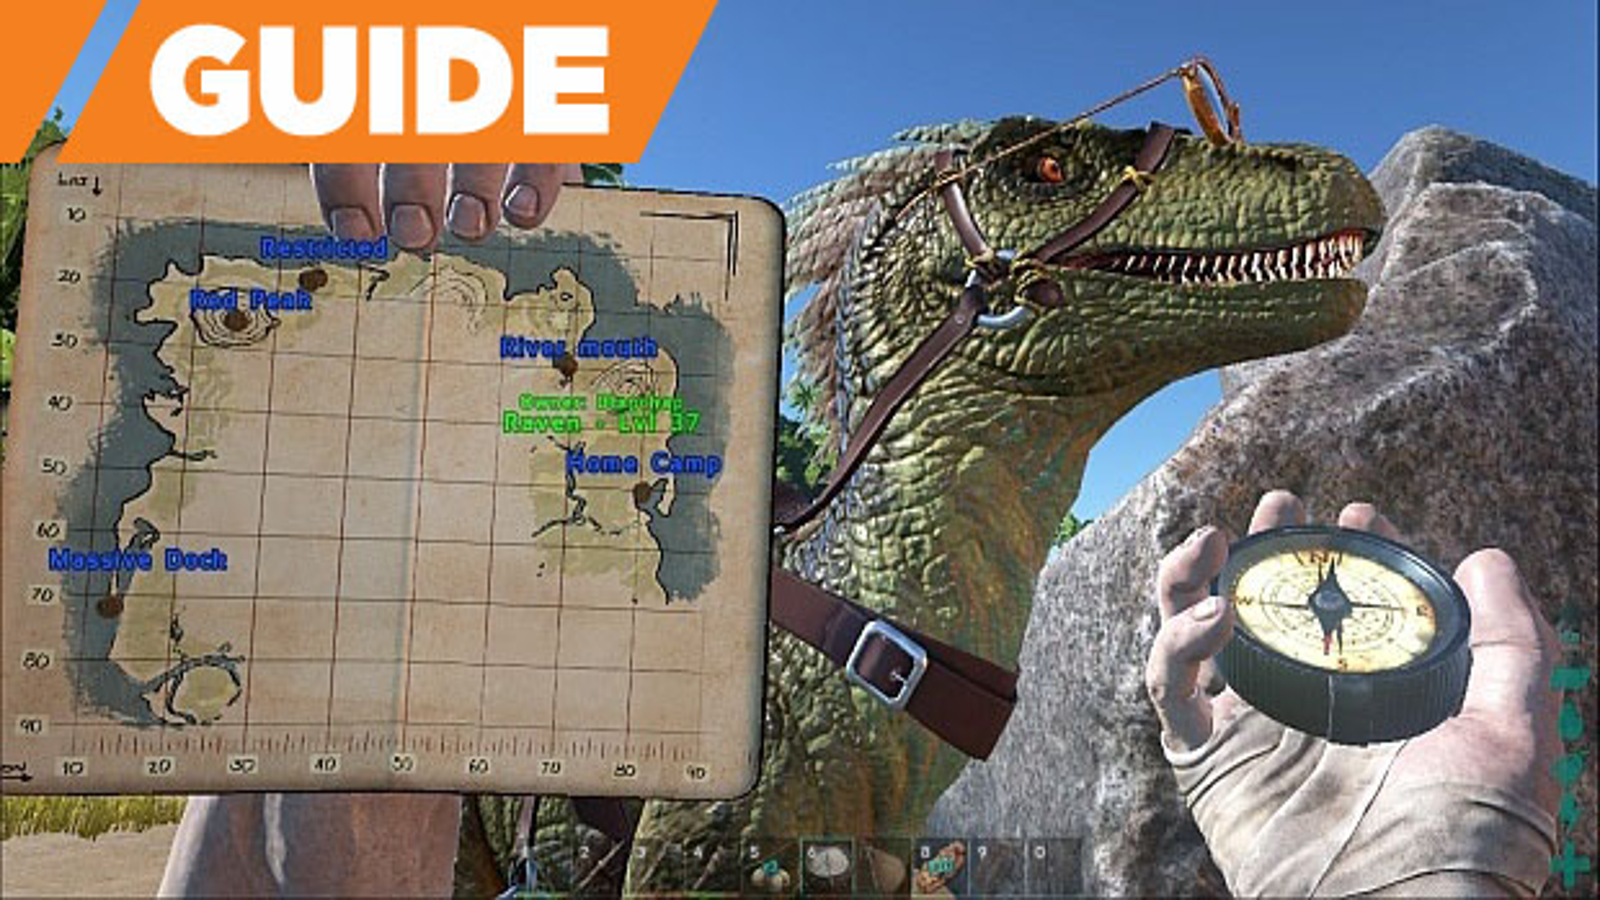 New to ark, trying to beat all the maps before Ark 2 releases. Im starting  with the island. Any suggestions on an order to play them. Ive only seen  gameplay of the